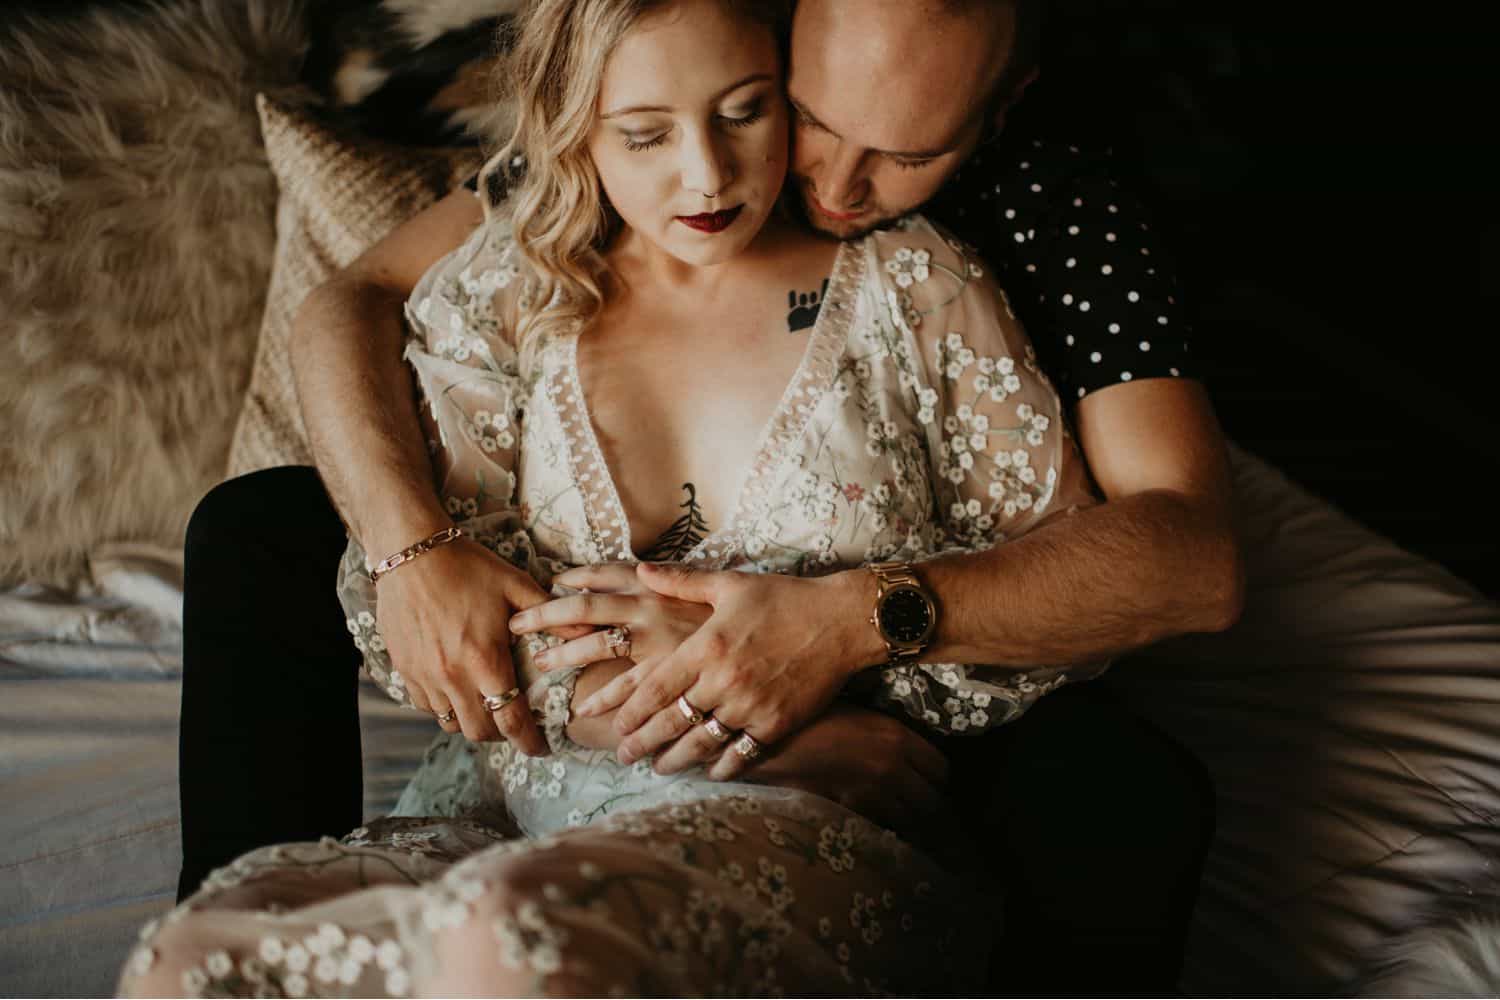 A woman in a white lace dress relaxes into the arms of a man in a black short-sleeved shirt. Learn how to take low light photos like this one by Shelby Laine Photography.